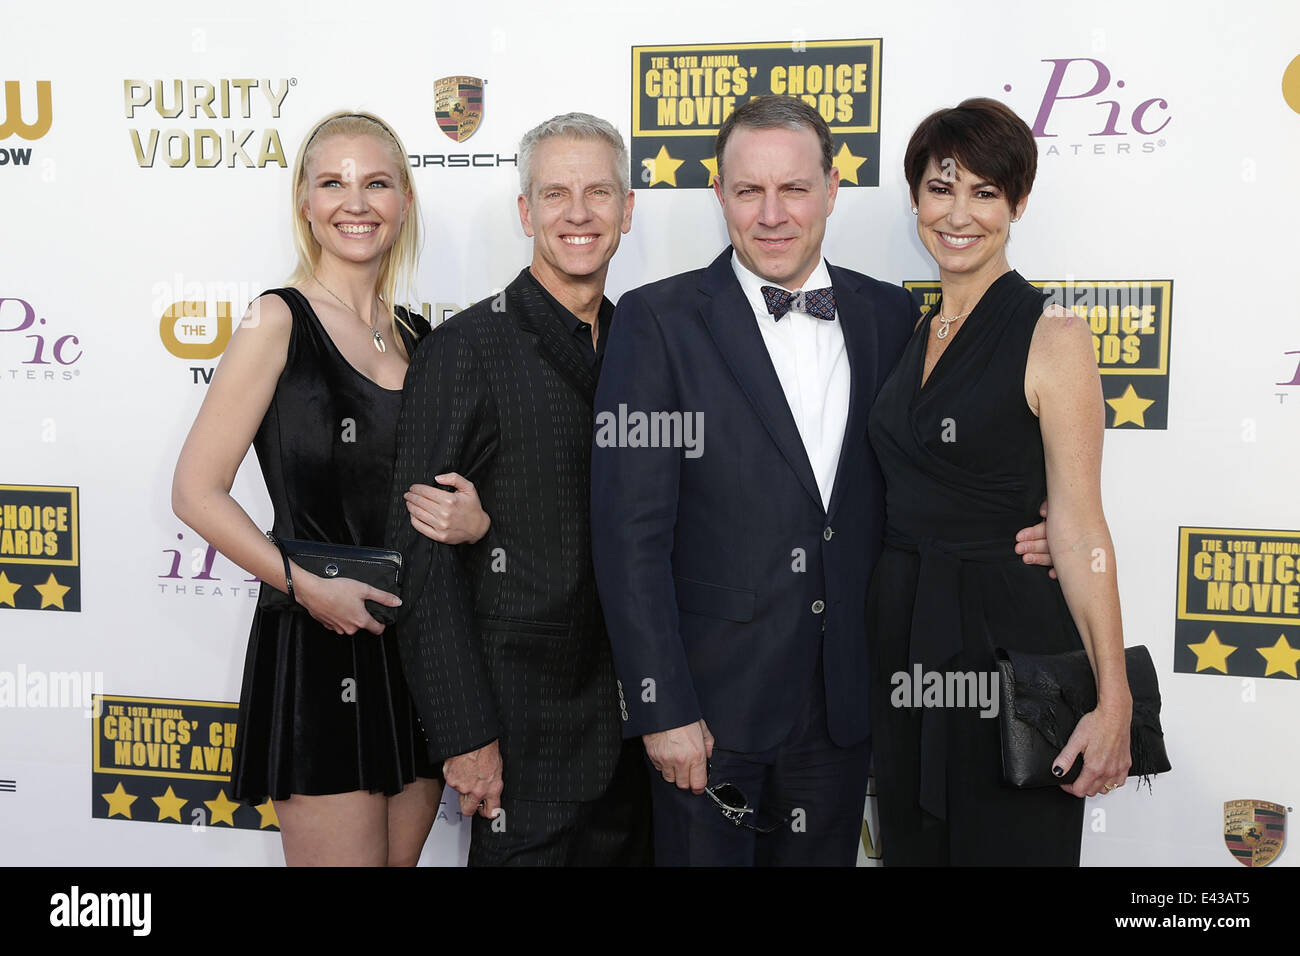 Celebrities attend the 19th Critics’ Choice Movie Awards Ceremony LIVE on The CW Network at The Barker Hangar.  Featuring: Guest,Chris Sanders,Kirk DeMicco Where: Los Angeles, California, United States When: 16 Jan 2014 Stock Photo